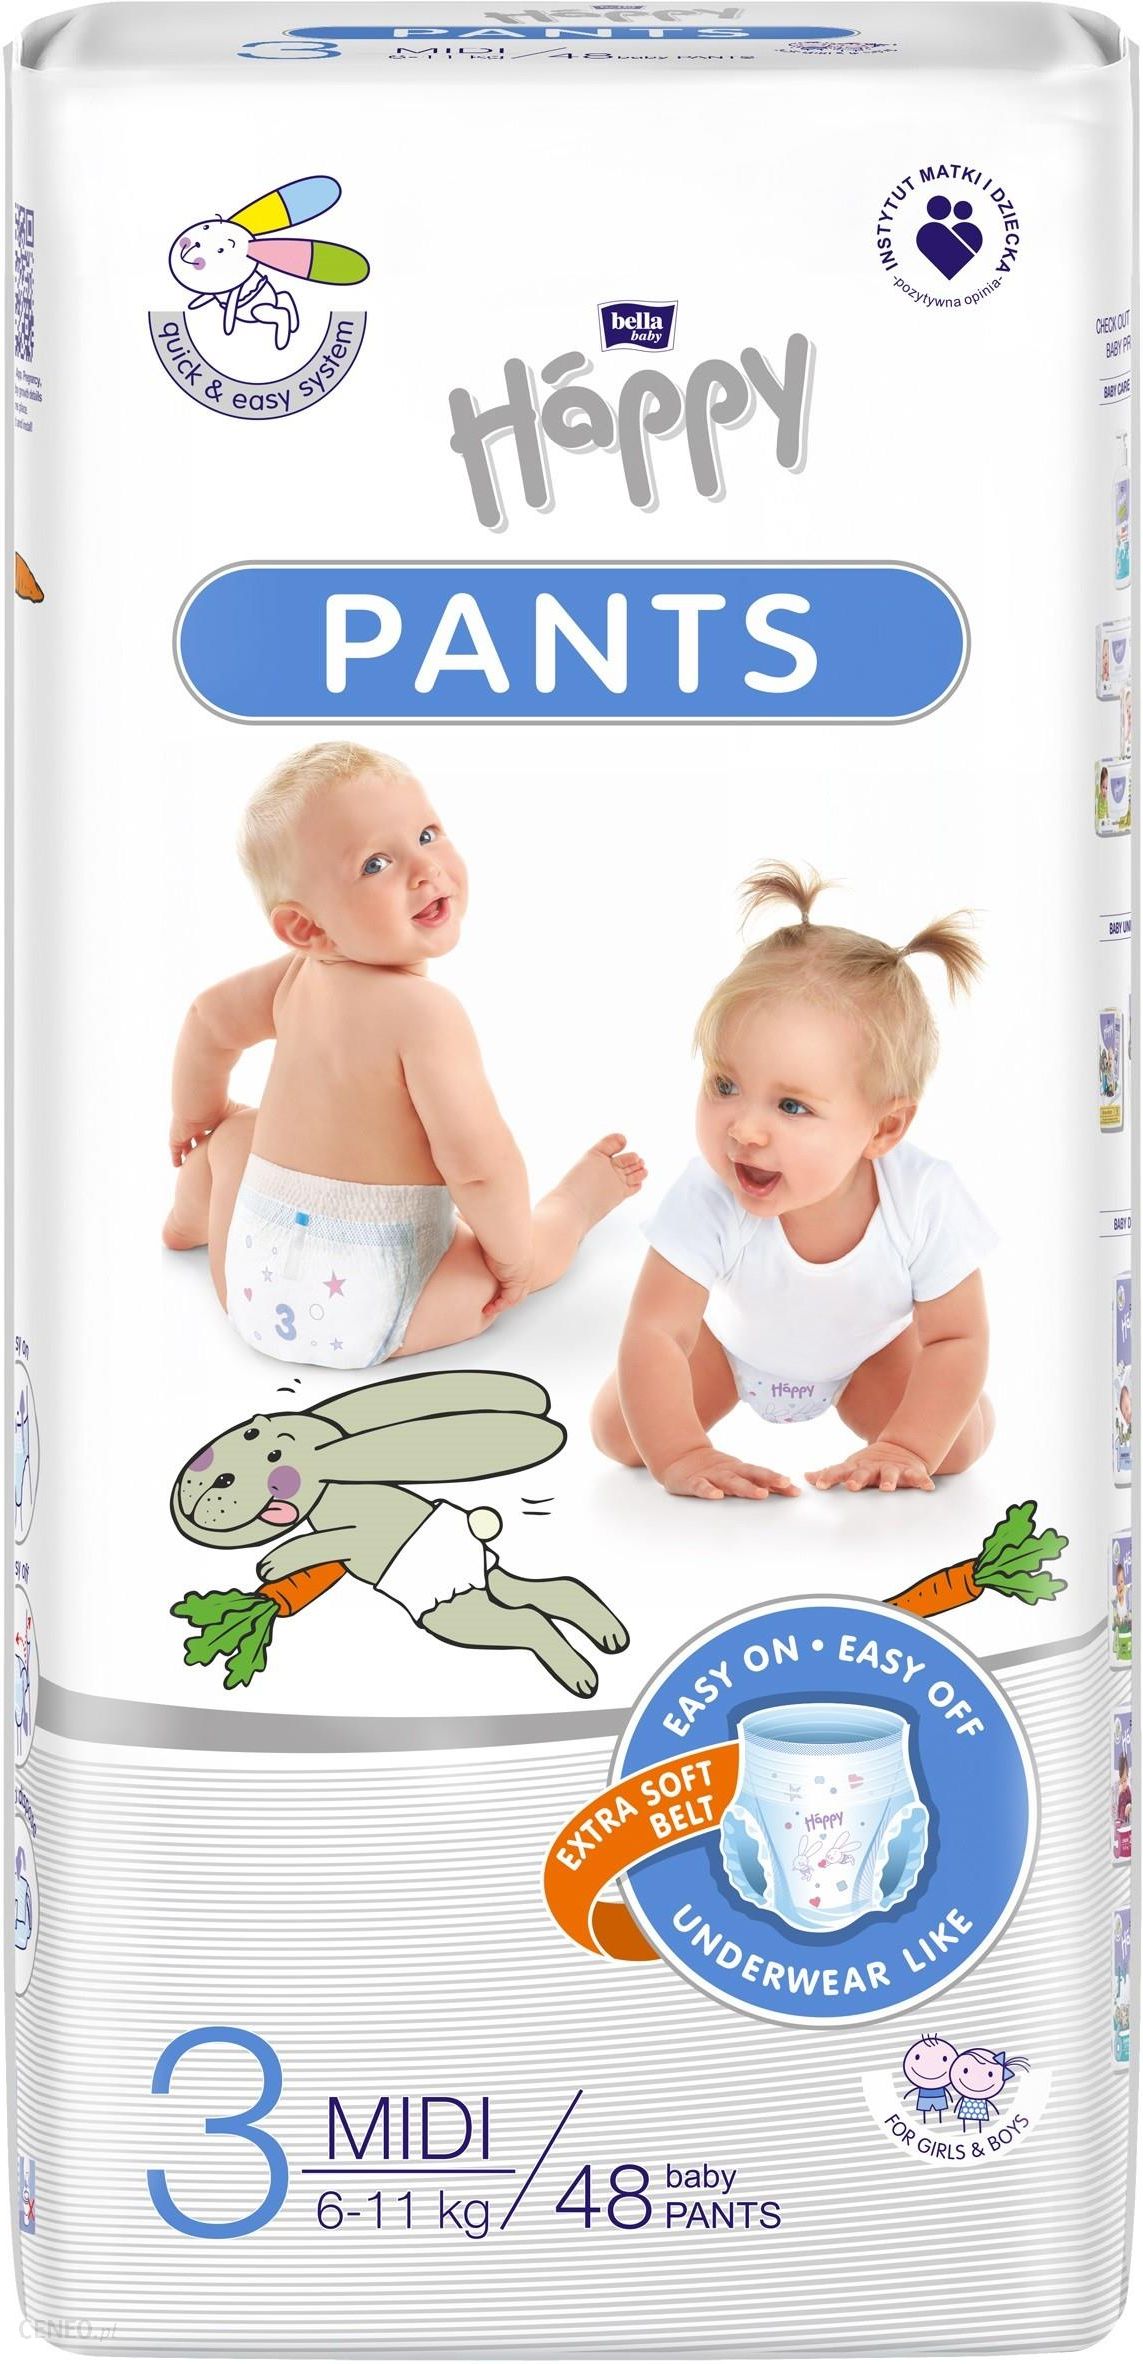 pampers proyekt